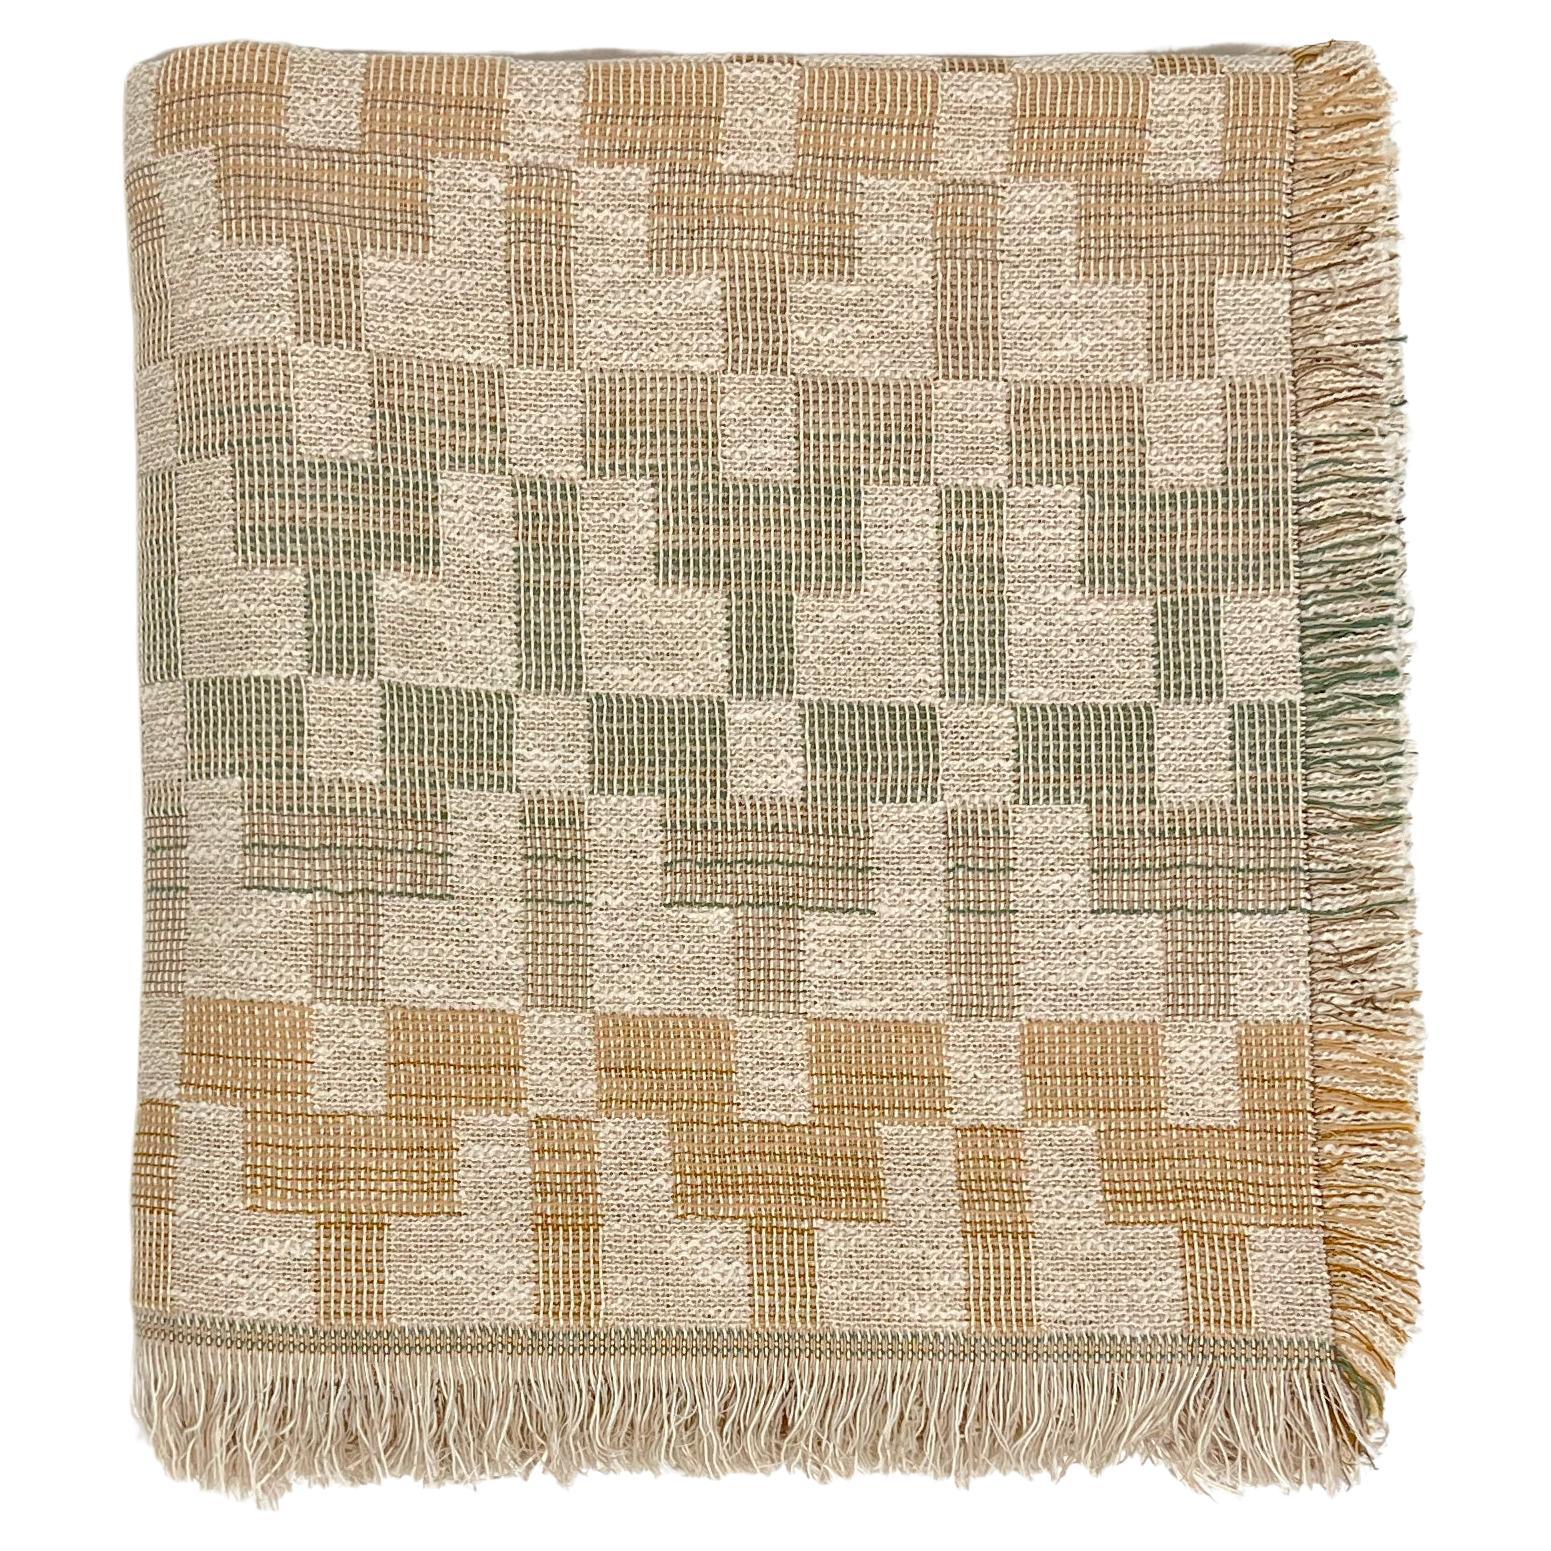 Patterned Woven Cotton Throw Blanket by Folk Textiles (Esme / Fade) For Sale